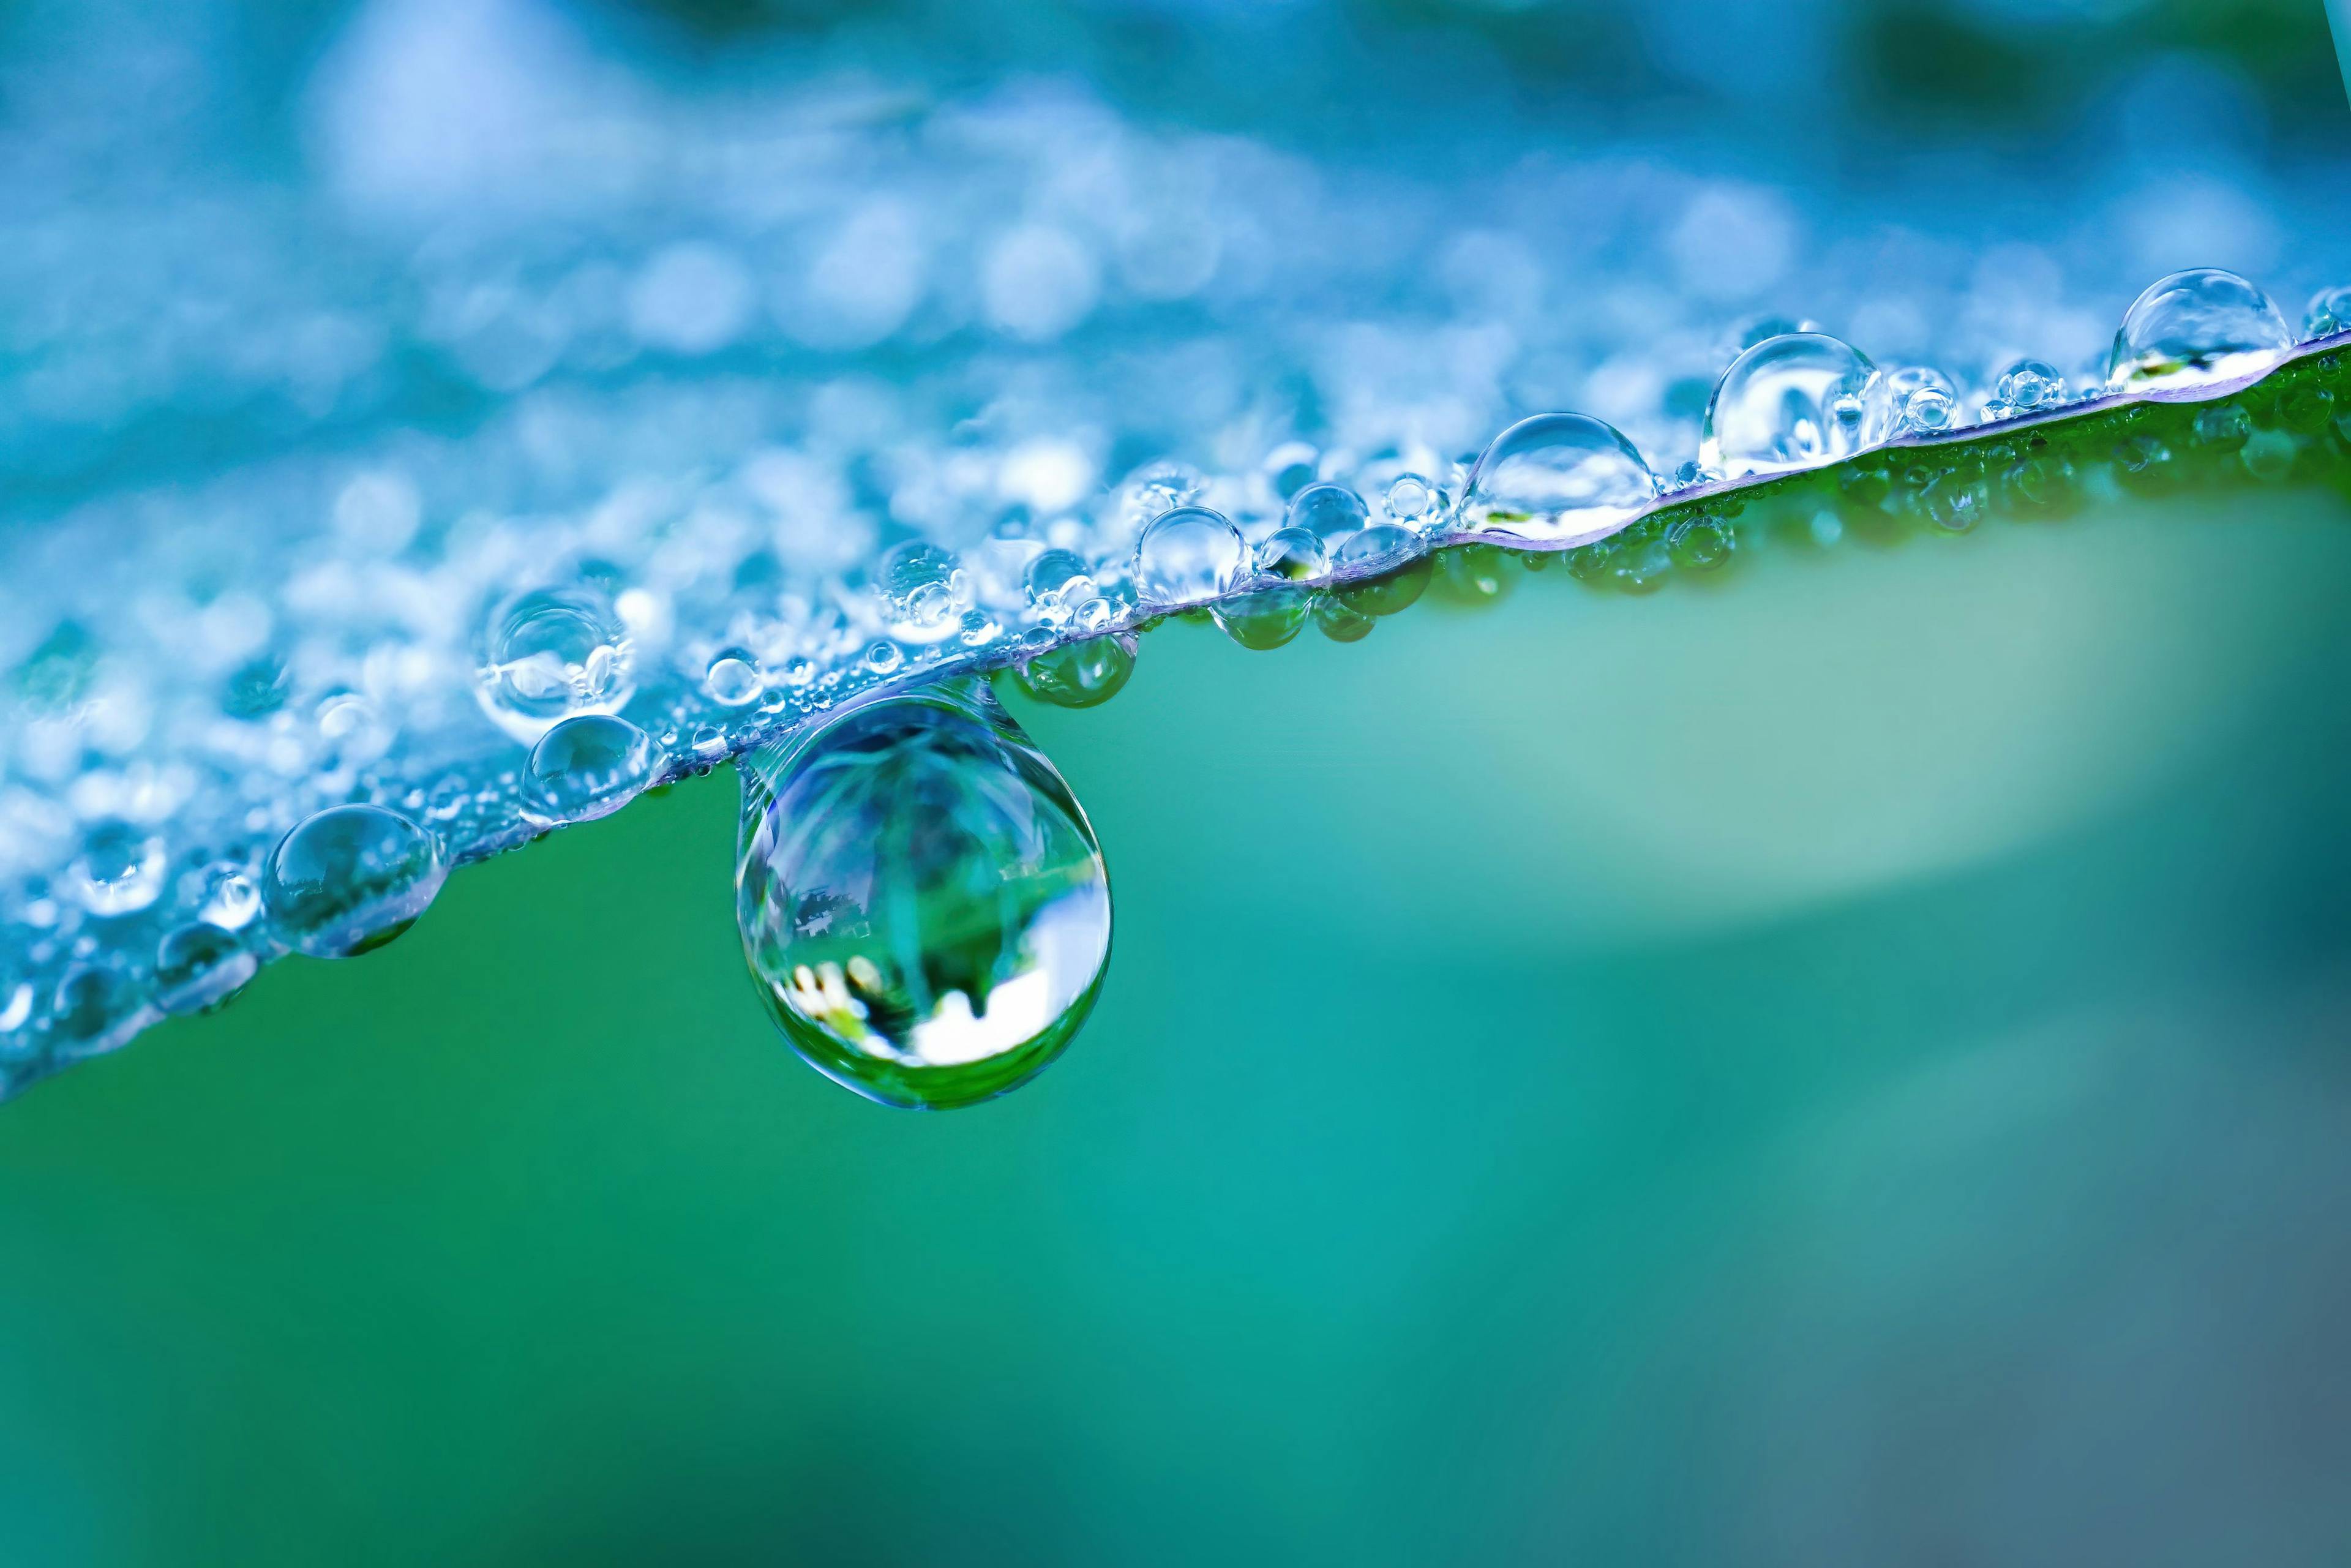 Large drop water reflects environment. Nature spring photography — raindrops on plant leaf. Background image in turquoise and green tones with bokeh. | Image Credit: © Laura Pashkevich - stock.adobe.com